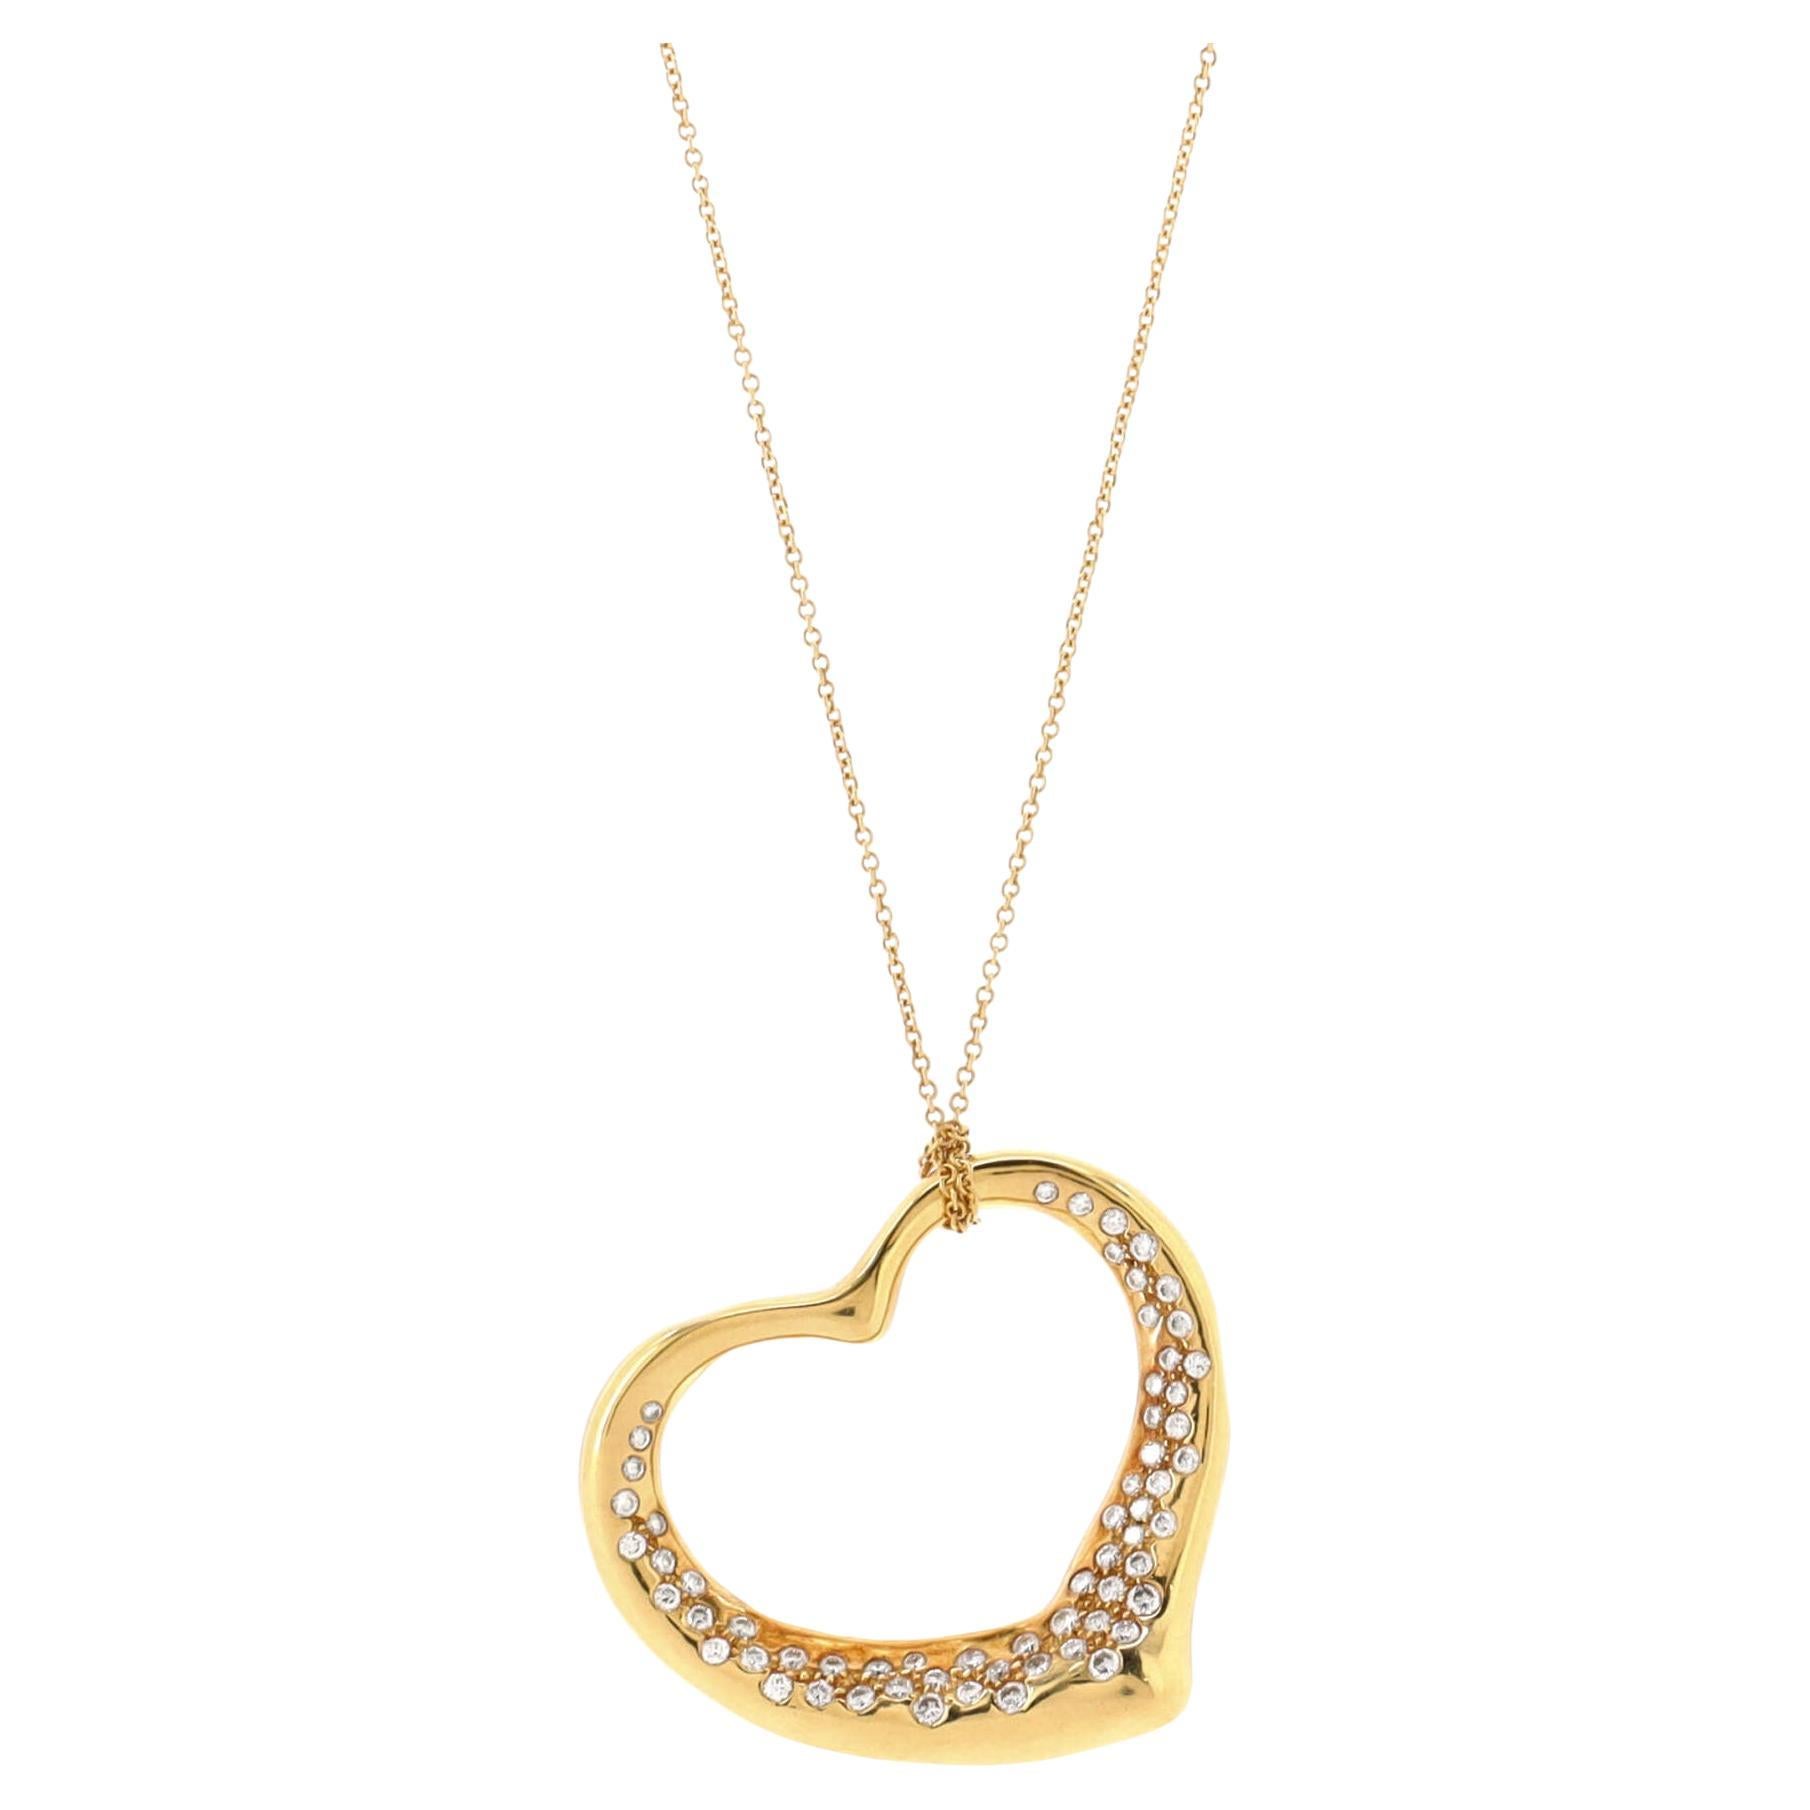 Tiffany & Co. Elsa Peretti Open Heart Pendant Necklace 18K Yellow Gold with Pave